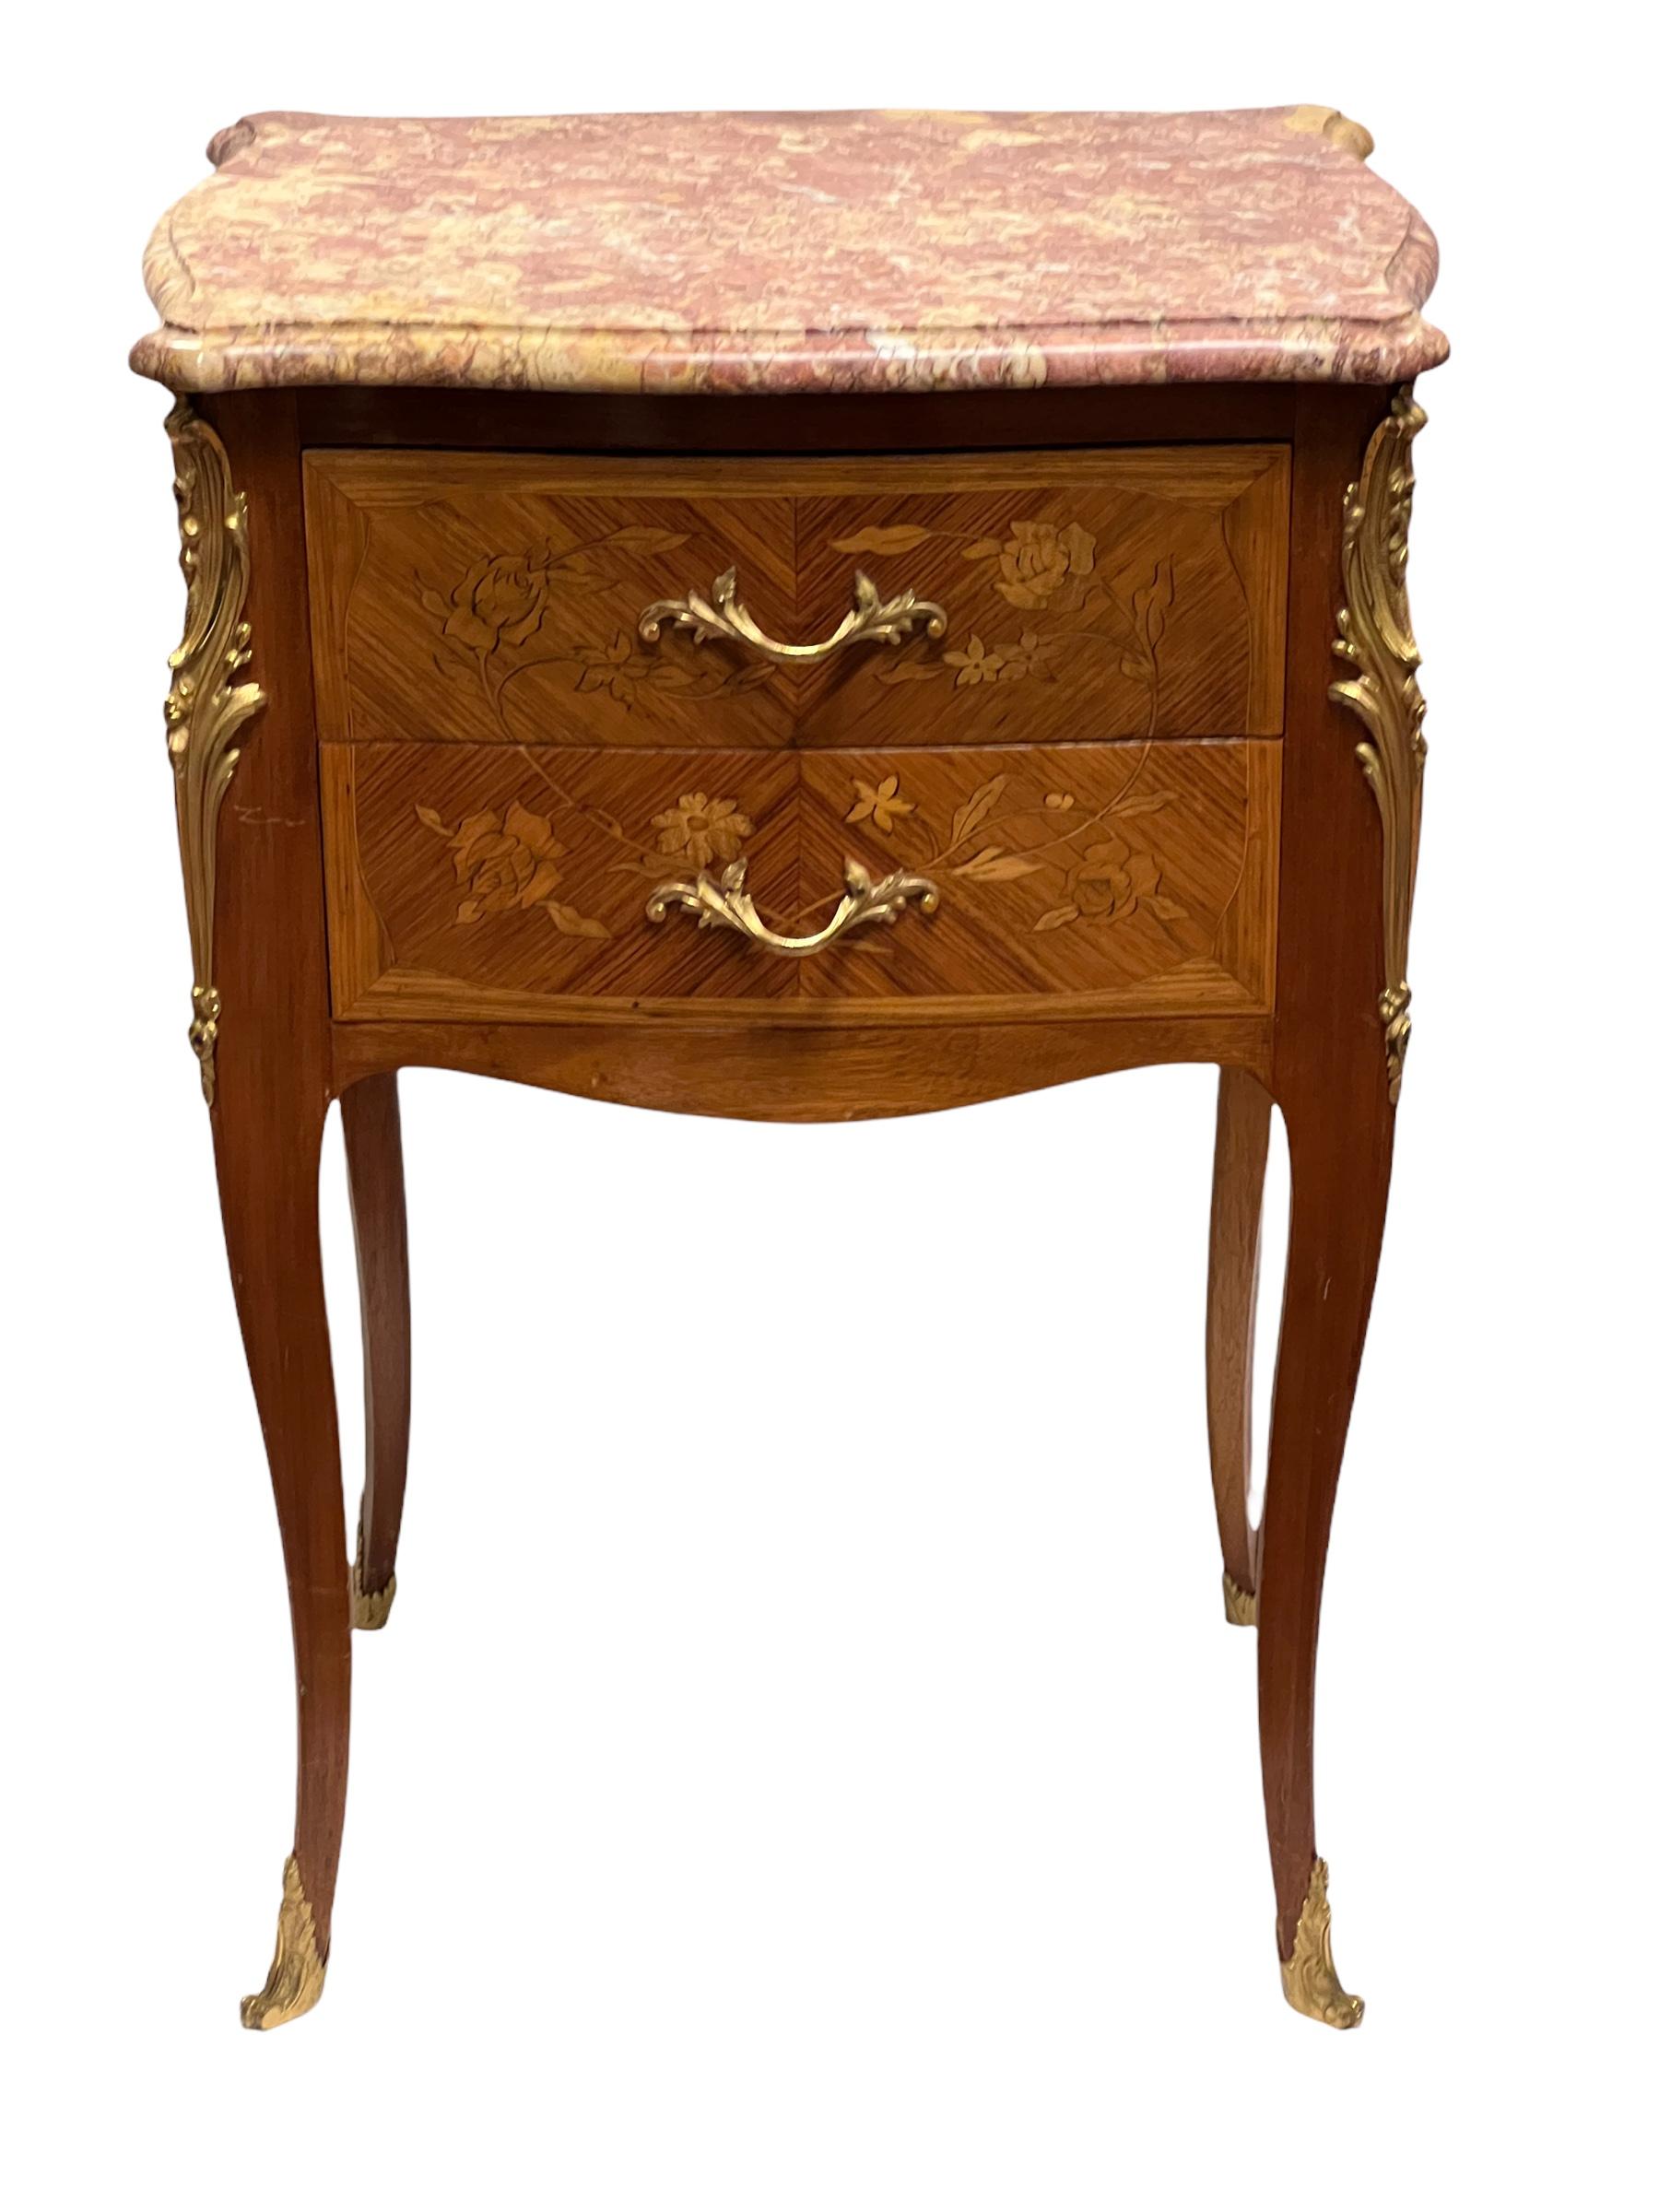 Pair of Louis XV Style French 19 century Marquetry inlaid gilt bronze mounted marble top two drawer end tables.
 